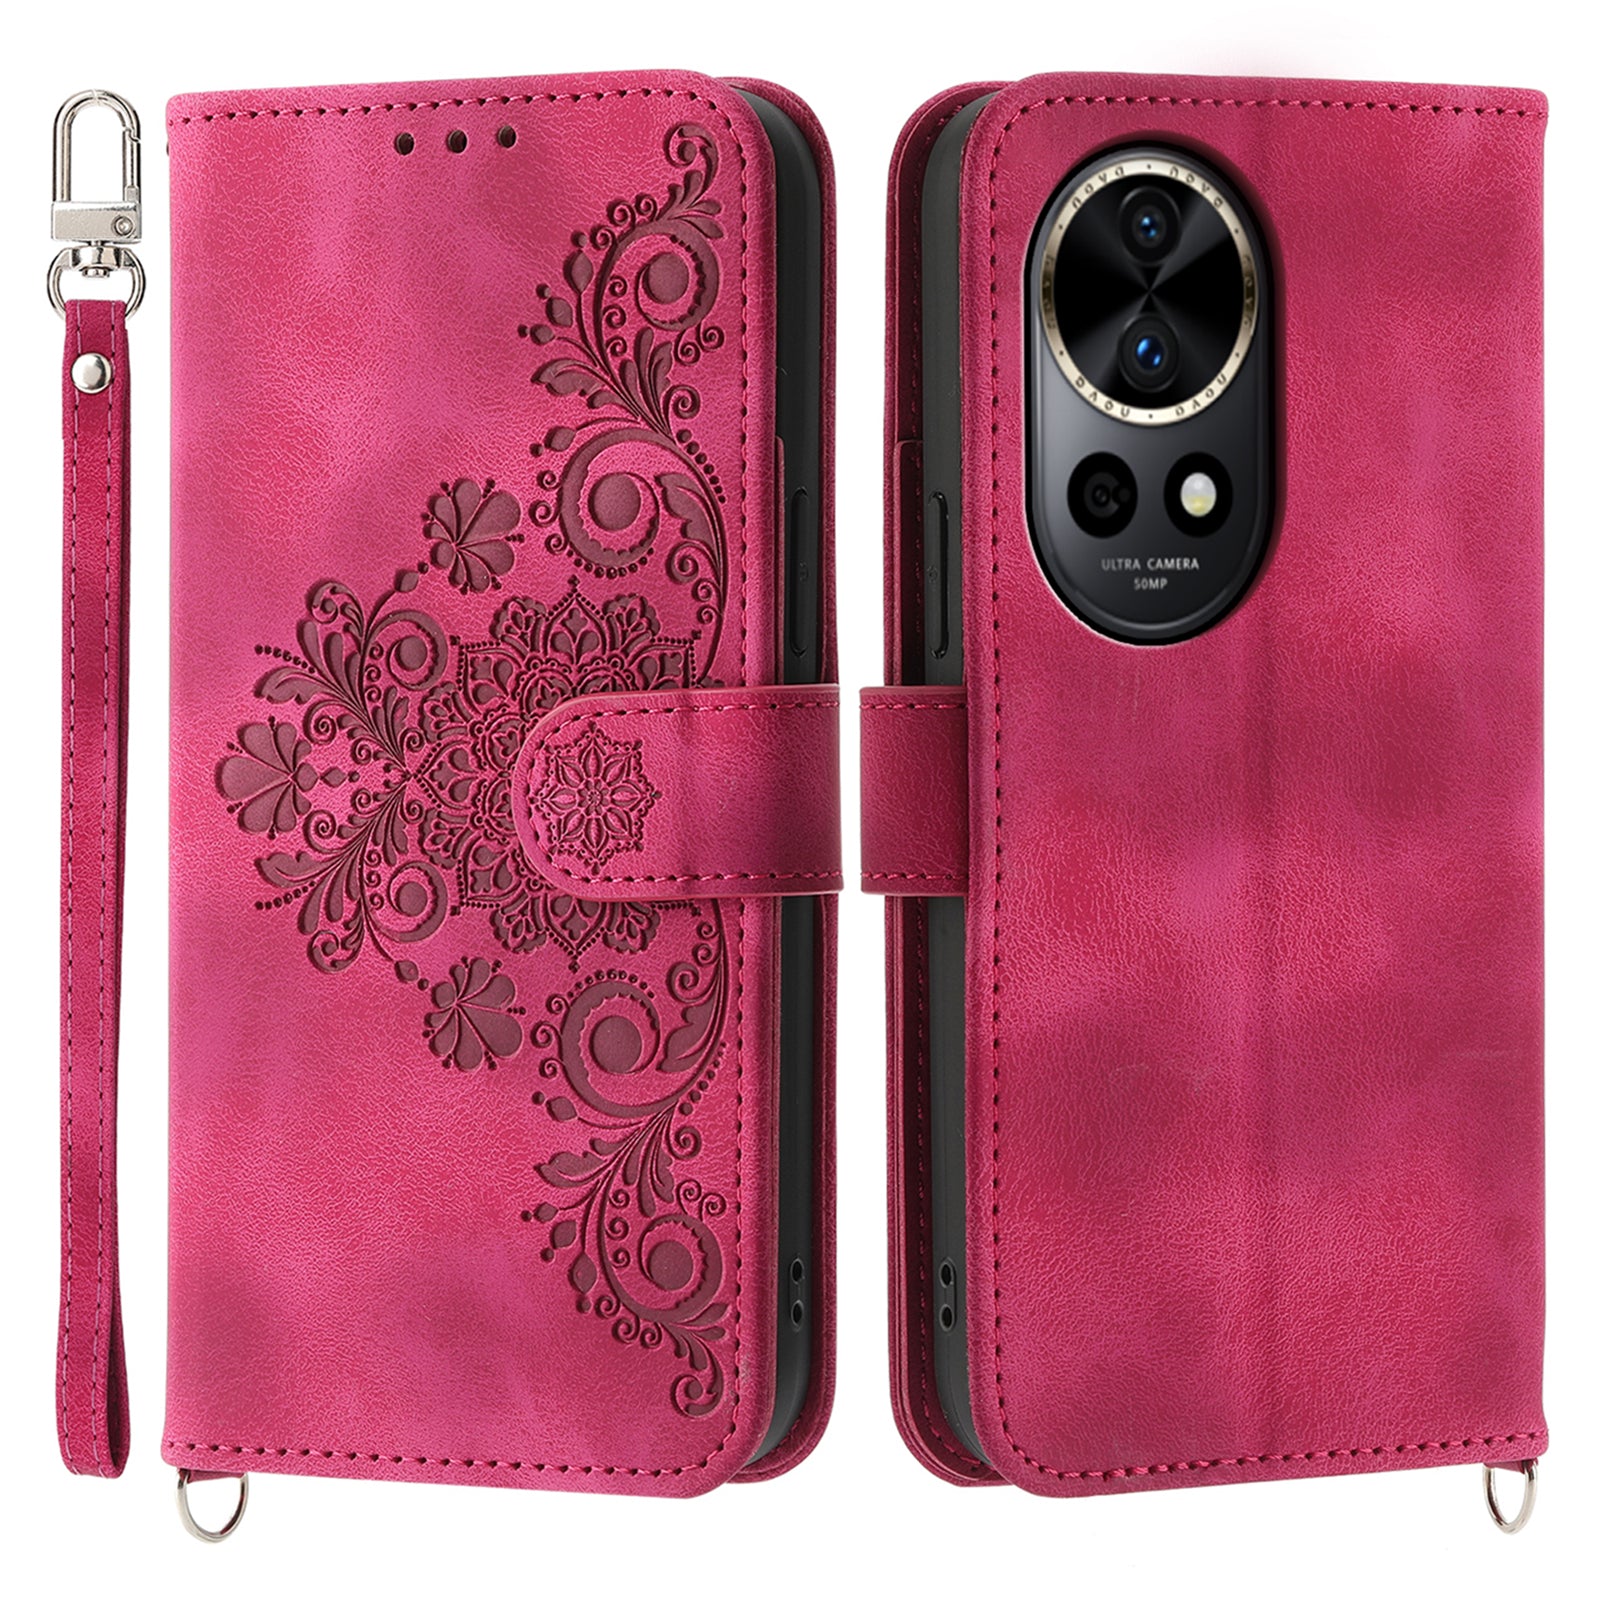 For Huawei nova 12 Pro 5G / nova 12 Ultra 5G Case Flower Wallet Leather Cover Mobile Accessories Wholesale Supplier - Wine Red